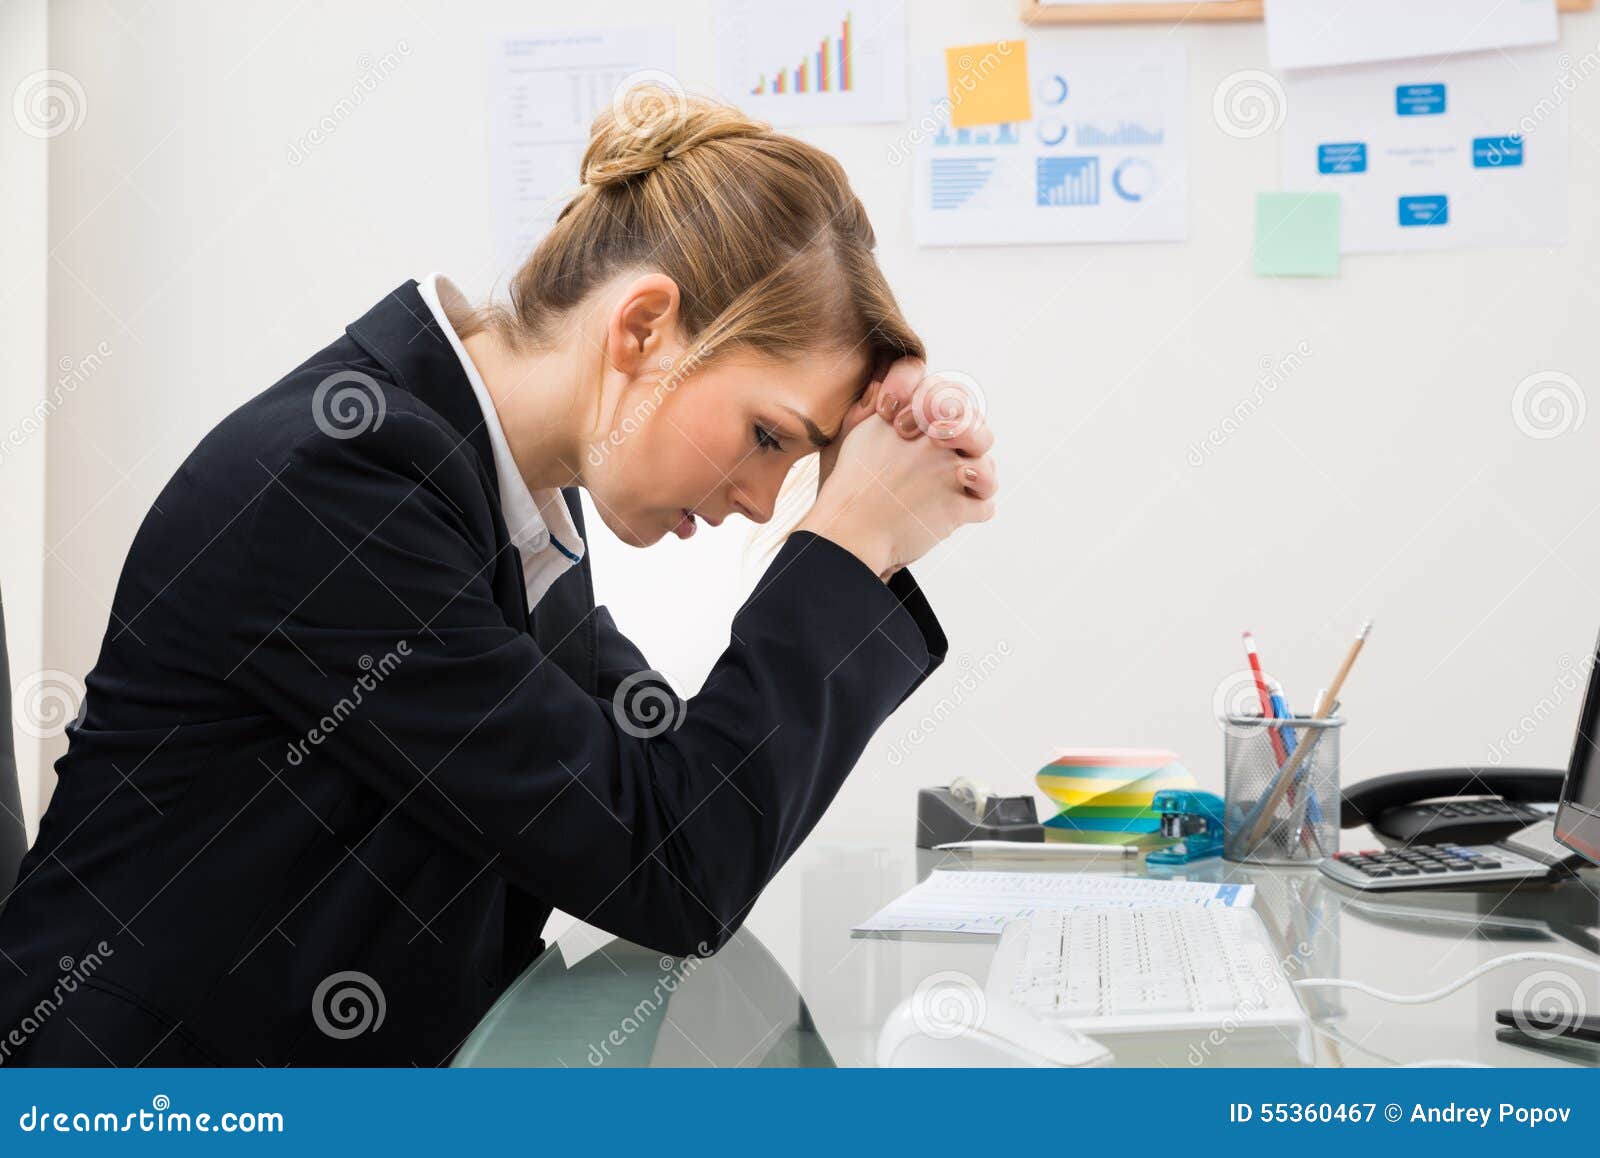 Upset Businesswoman In Office Stock Image Image Of Modern